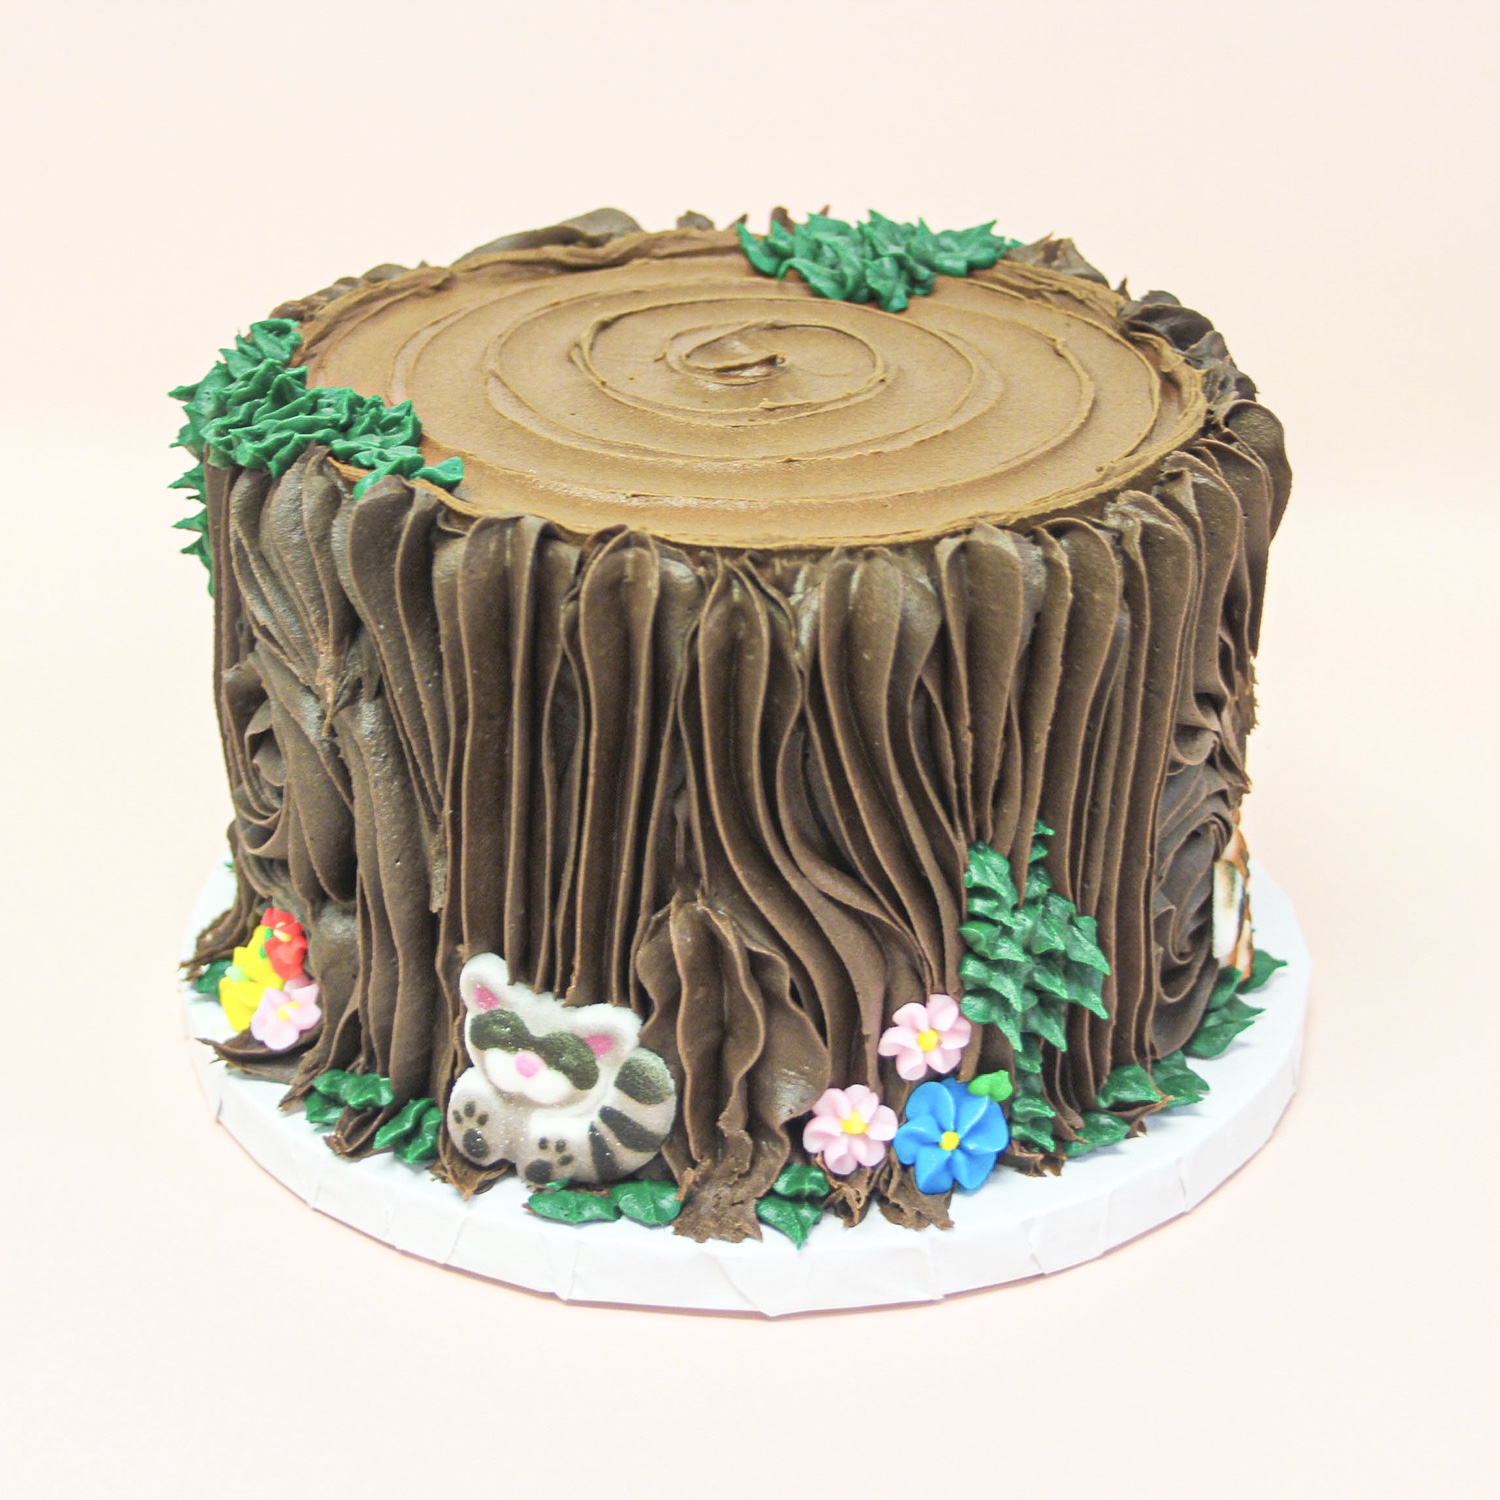 Tree stump cake with chocolate buttercream piped bark, green buttercream leaves, icing sugar decorations in flowers and woodland animals.